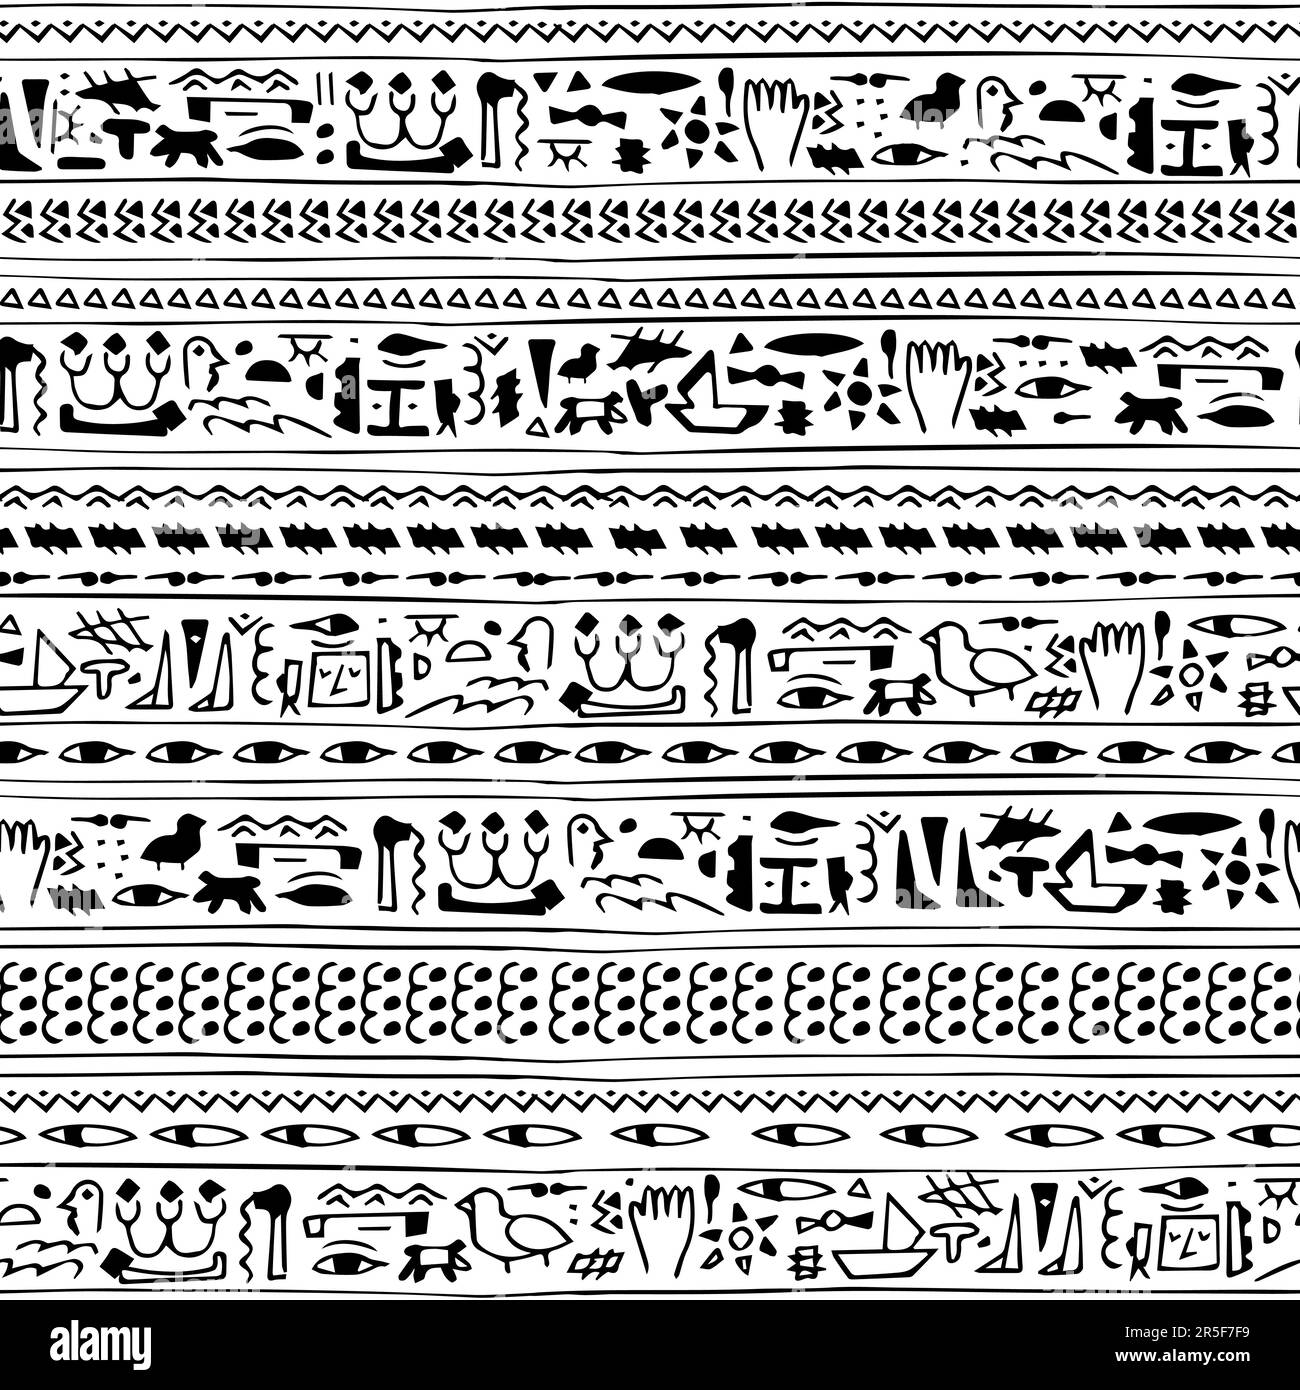 Ancient Egypts allure monochrome seamless pattern, featuring hand-drawn symbols reminiscent of hieroglyphs. Perfect for clothing, curtains, and Stock Vector